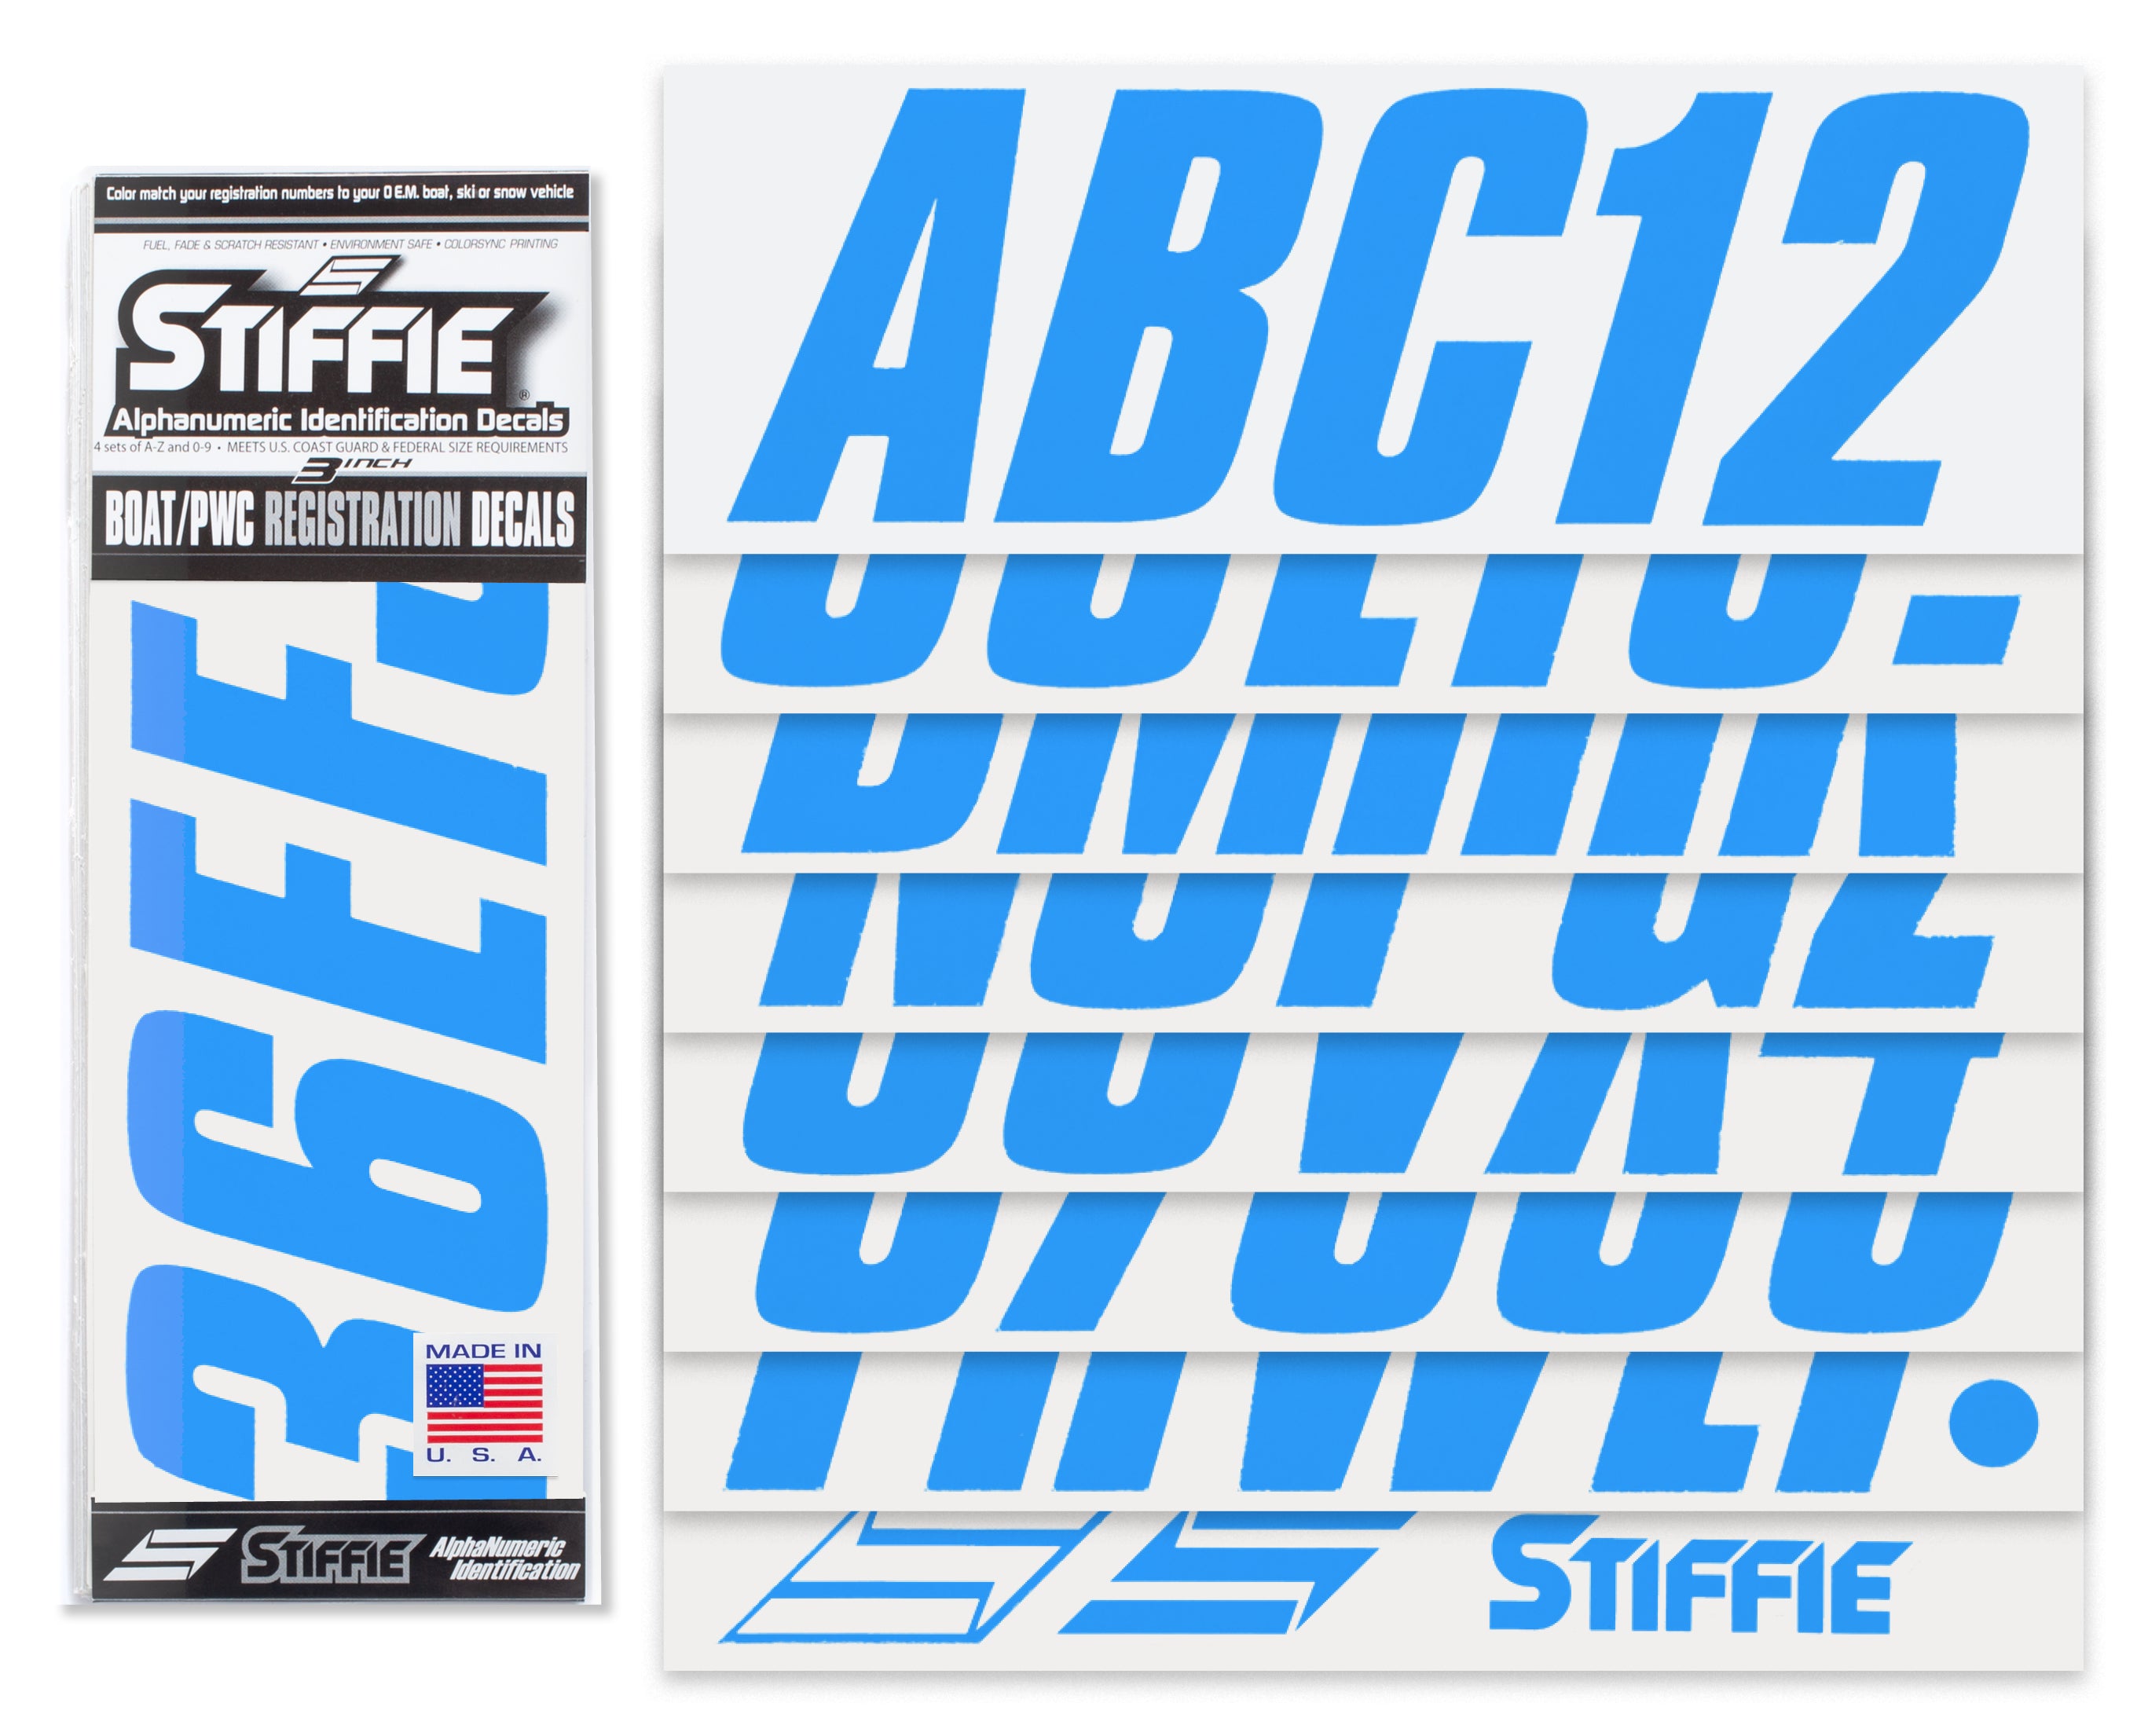 STIFFIE Shift Blueberry Super Sticky 3" Alpha Numeric Registration Identification Numbers Stickers Decals for Sea-Doo Spark, Inflatable Boats, Ribs, Hypalon/PVC, PWC and Boats.